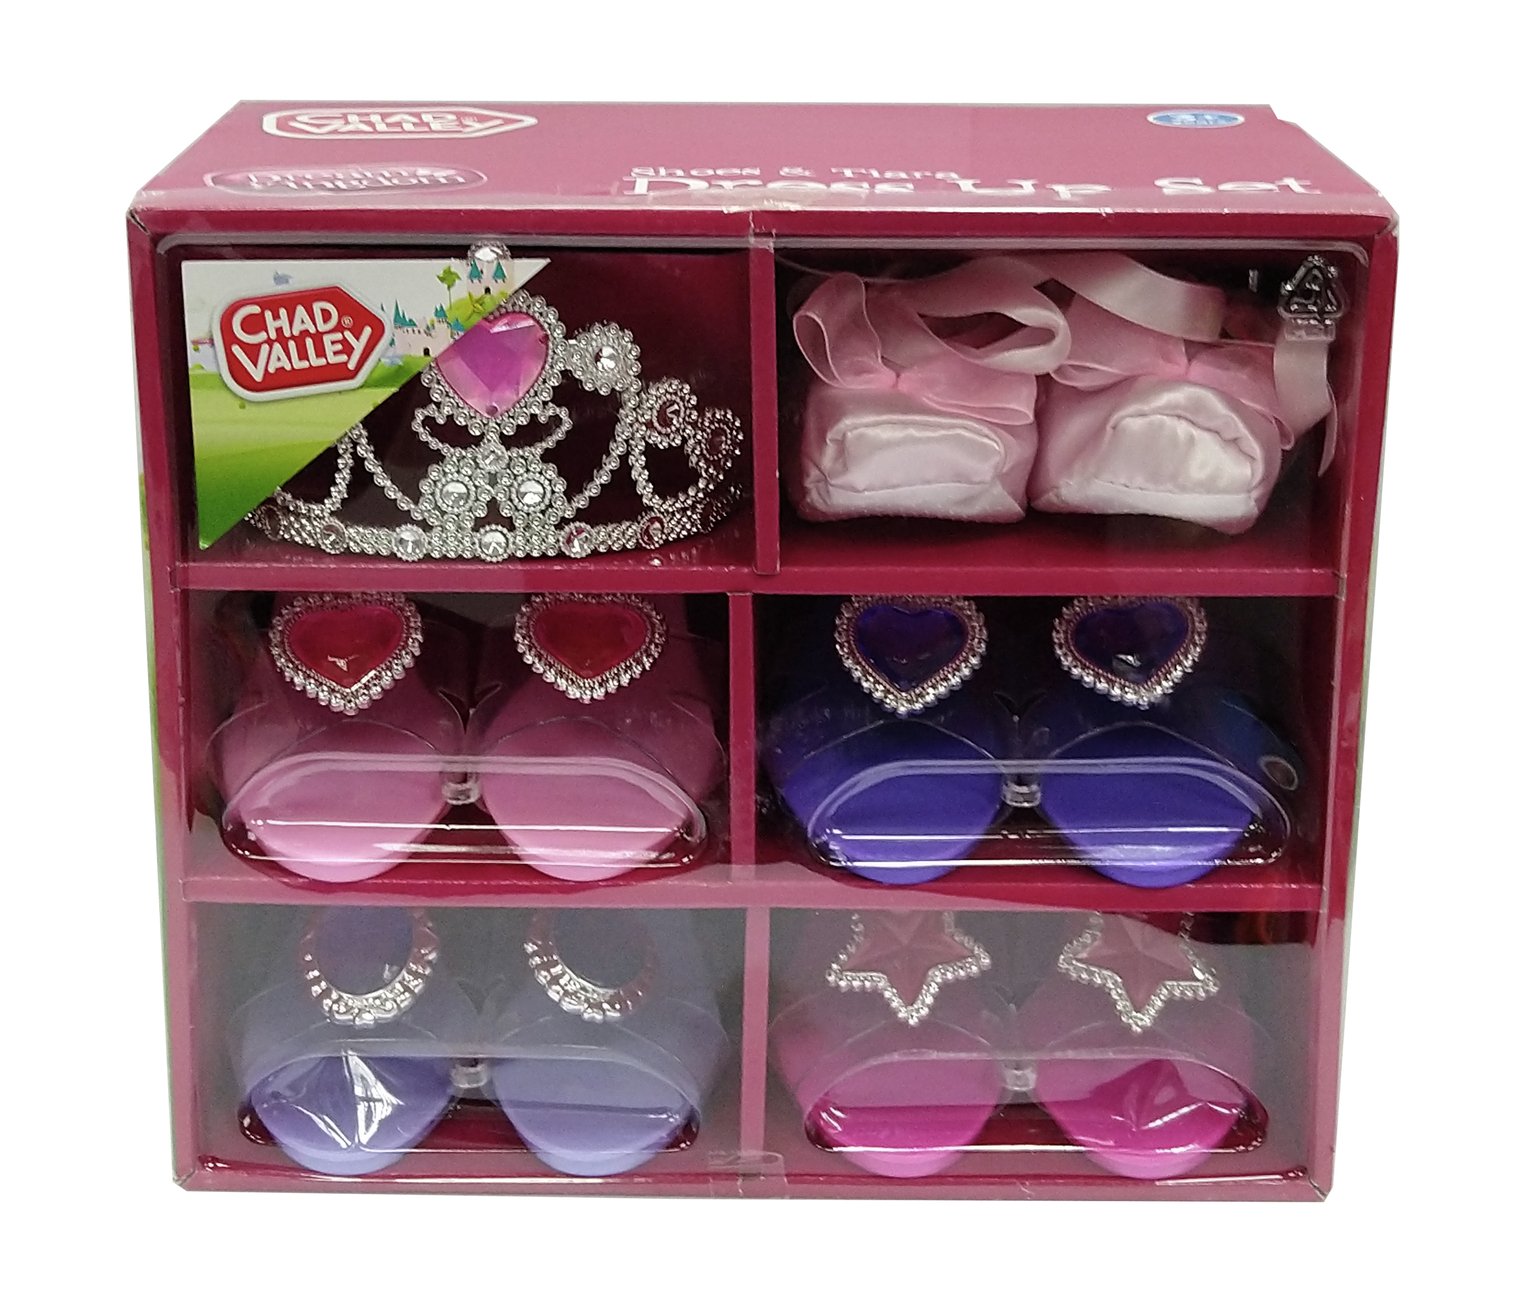 5 Pack with Tiara Ribbons Transforming Themselves UK Chad Valley Glamour Shoes